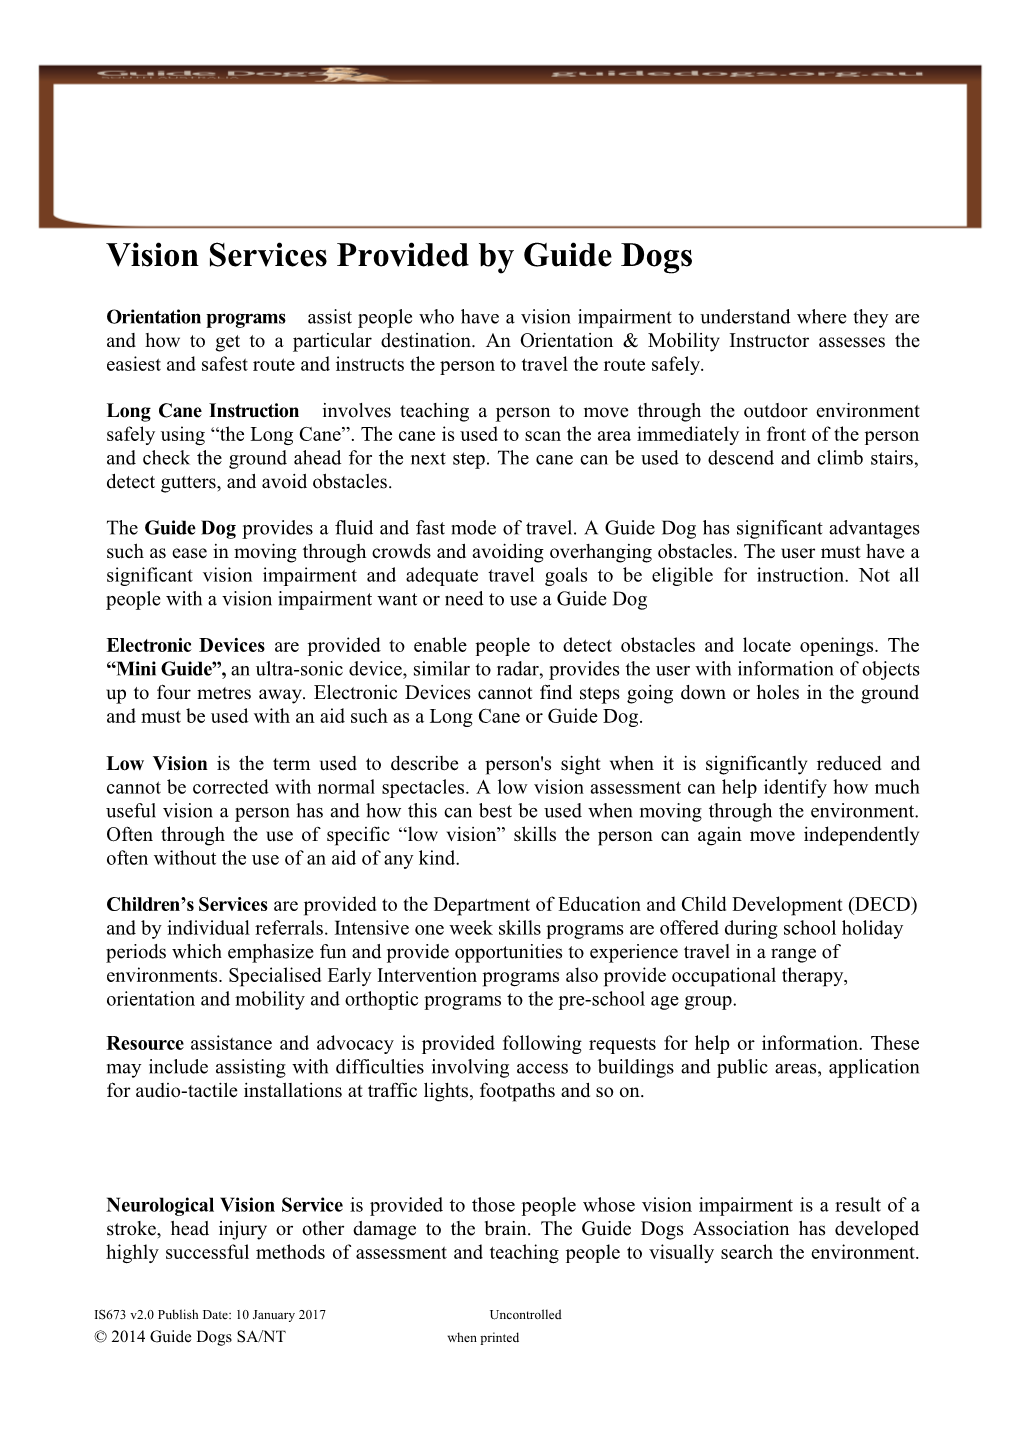 Vision Services Provided by Guide Dogs